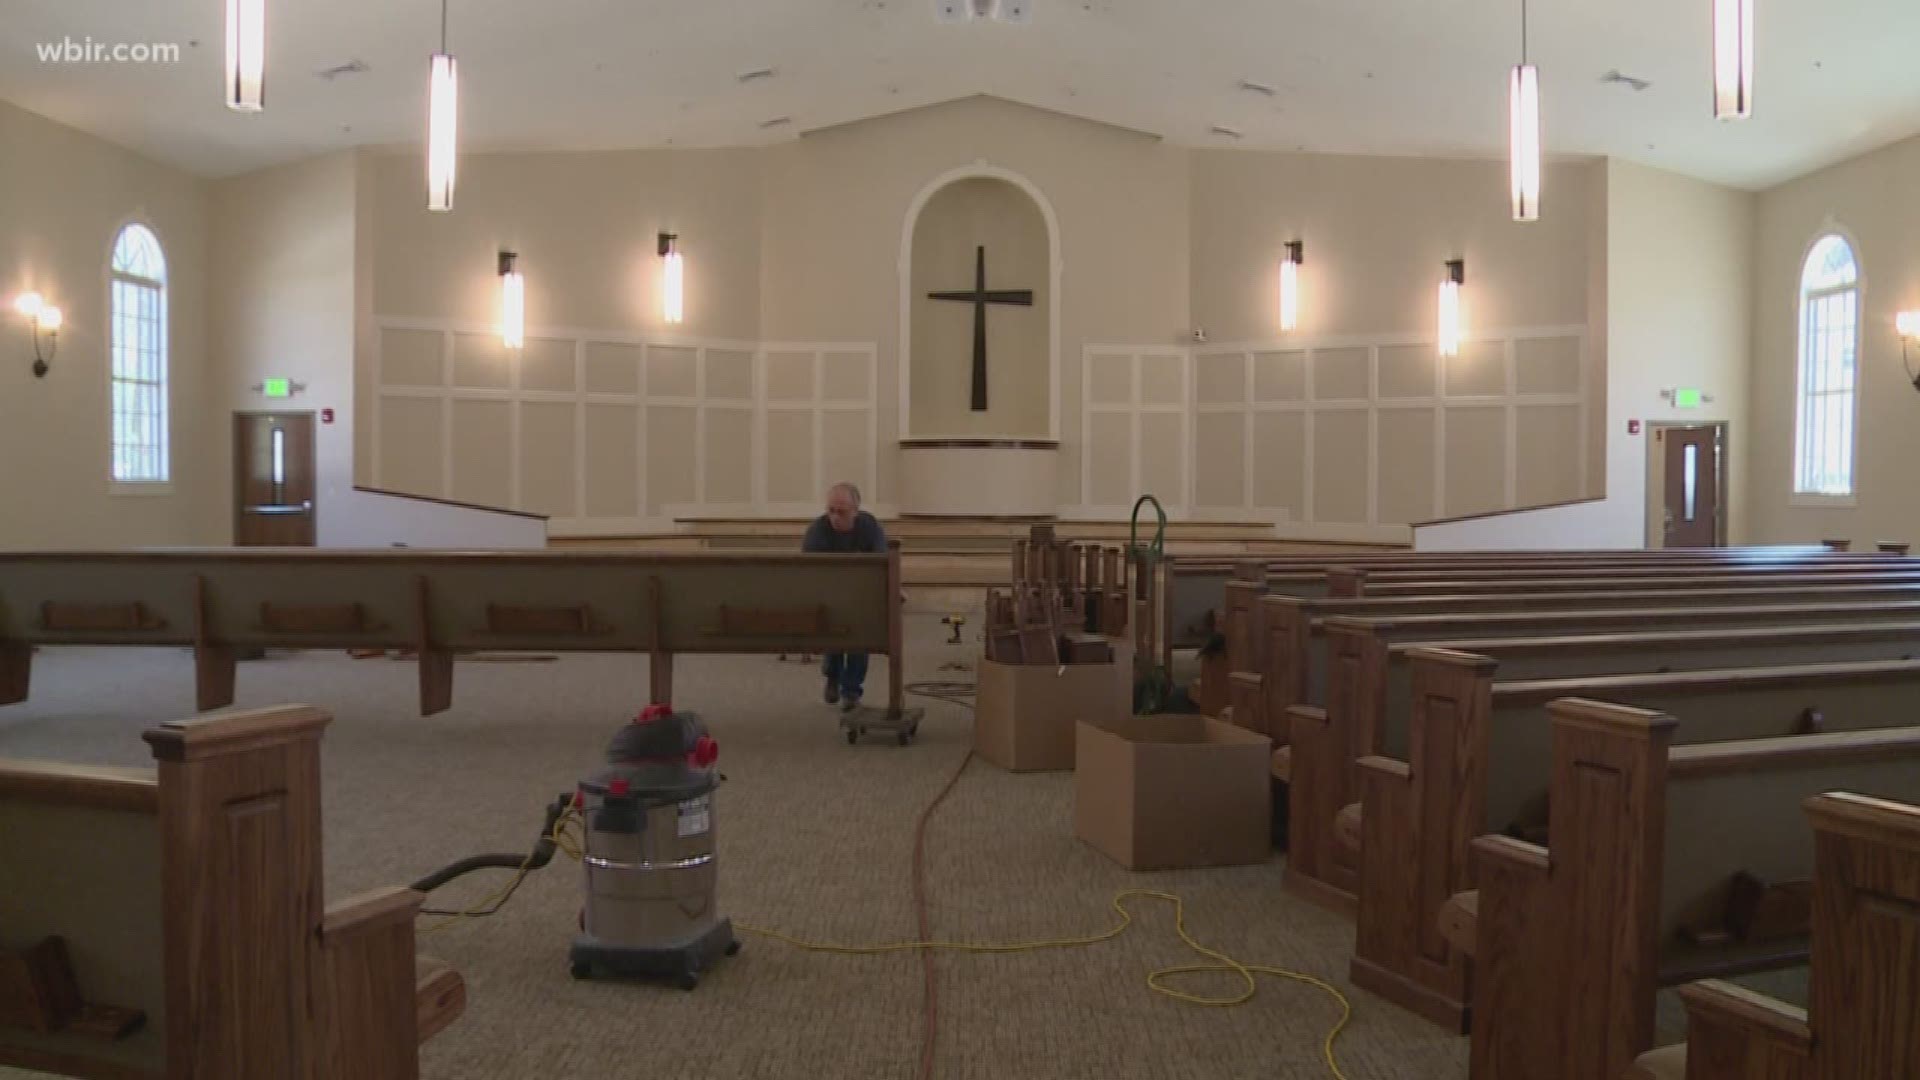 Roaring Fork Baptist Church was destroyed by fire in November 2016. Workers installed the pews in the almost completed building today. They  hope to be open this spring.